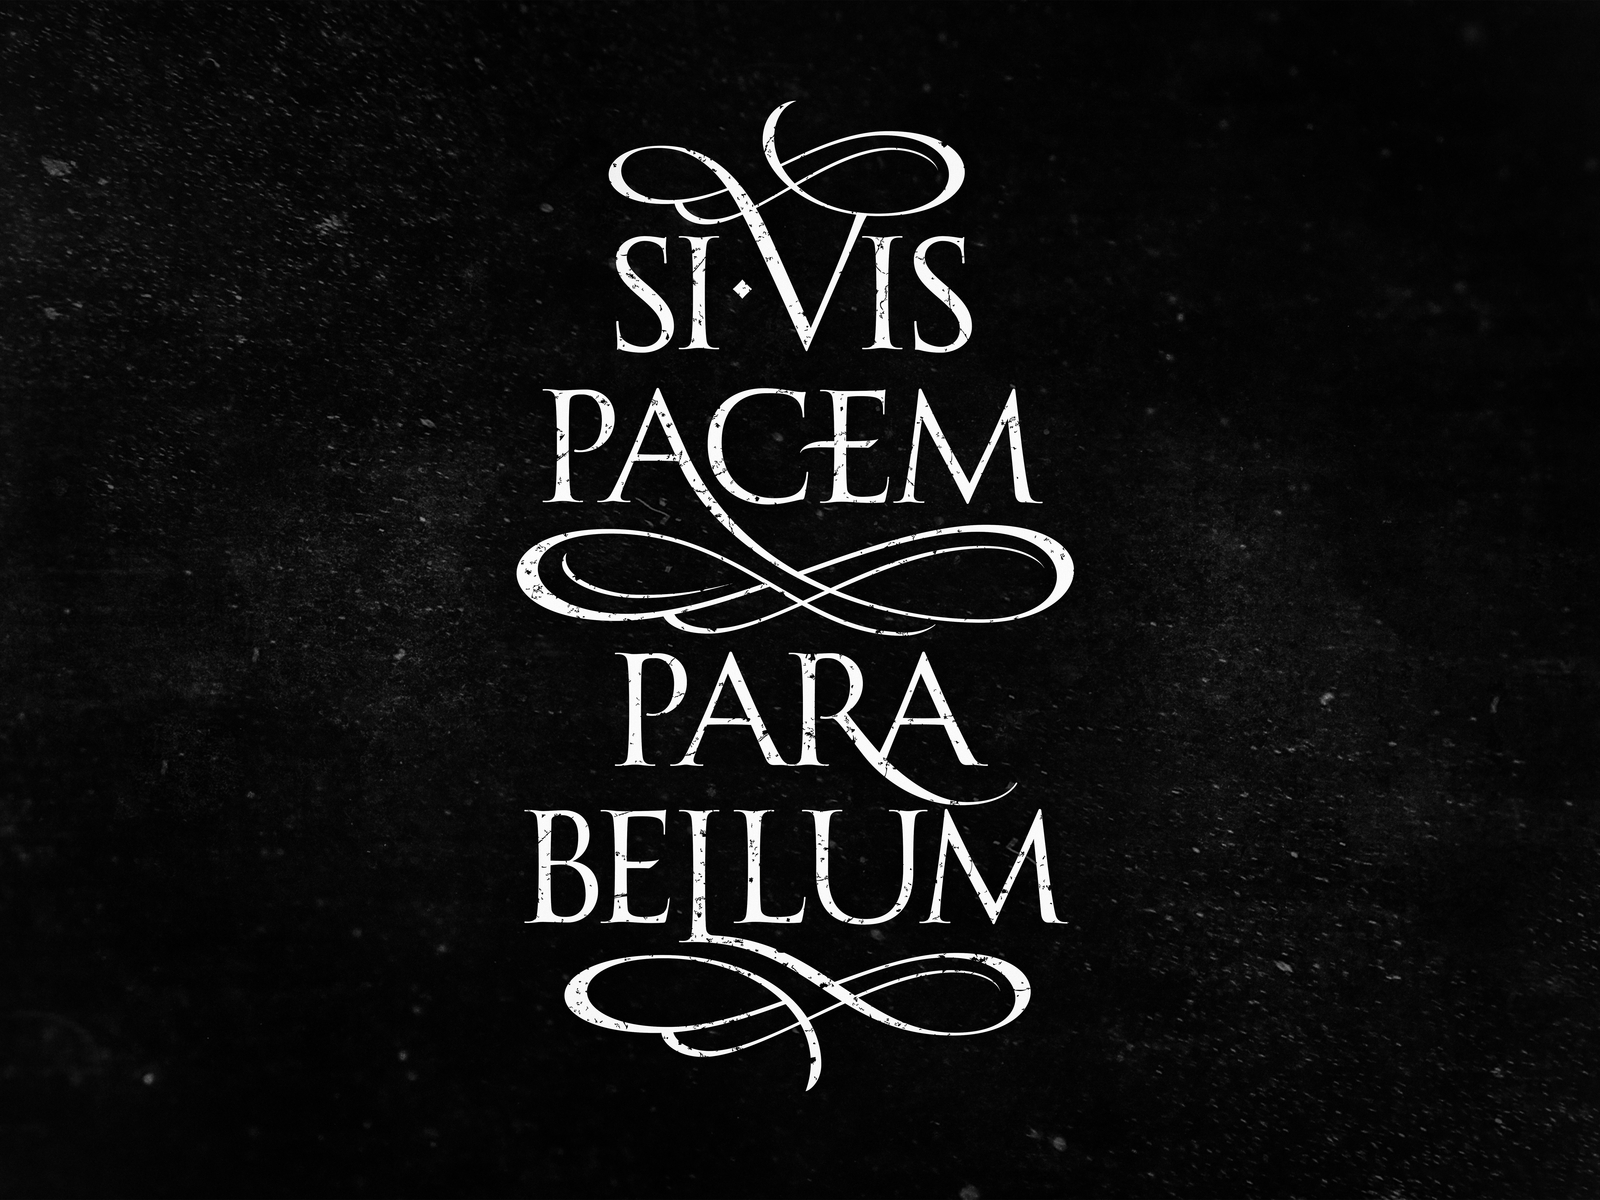 Si Vis Pacem Para Bellum Written With Fire Loop Stock Video  Download  Video Clip Now  4K Resolution Ancient Author  iStock